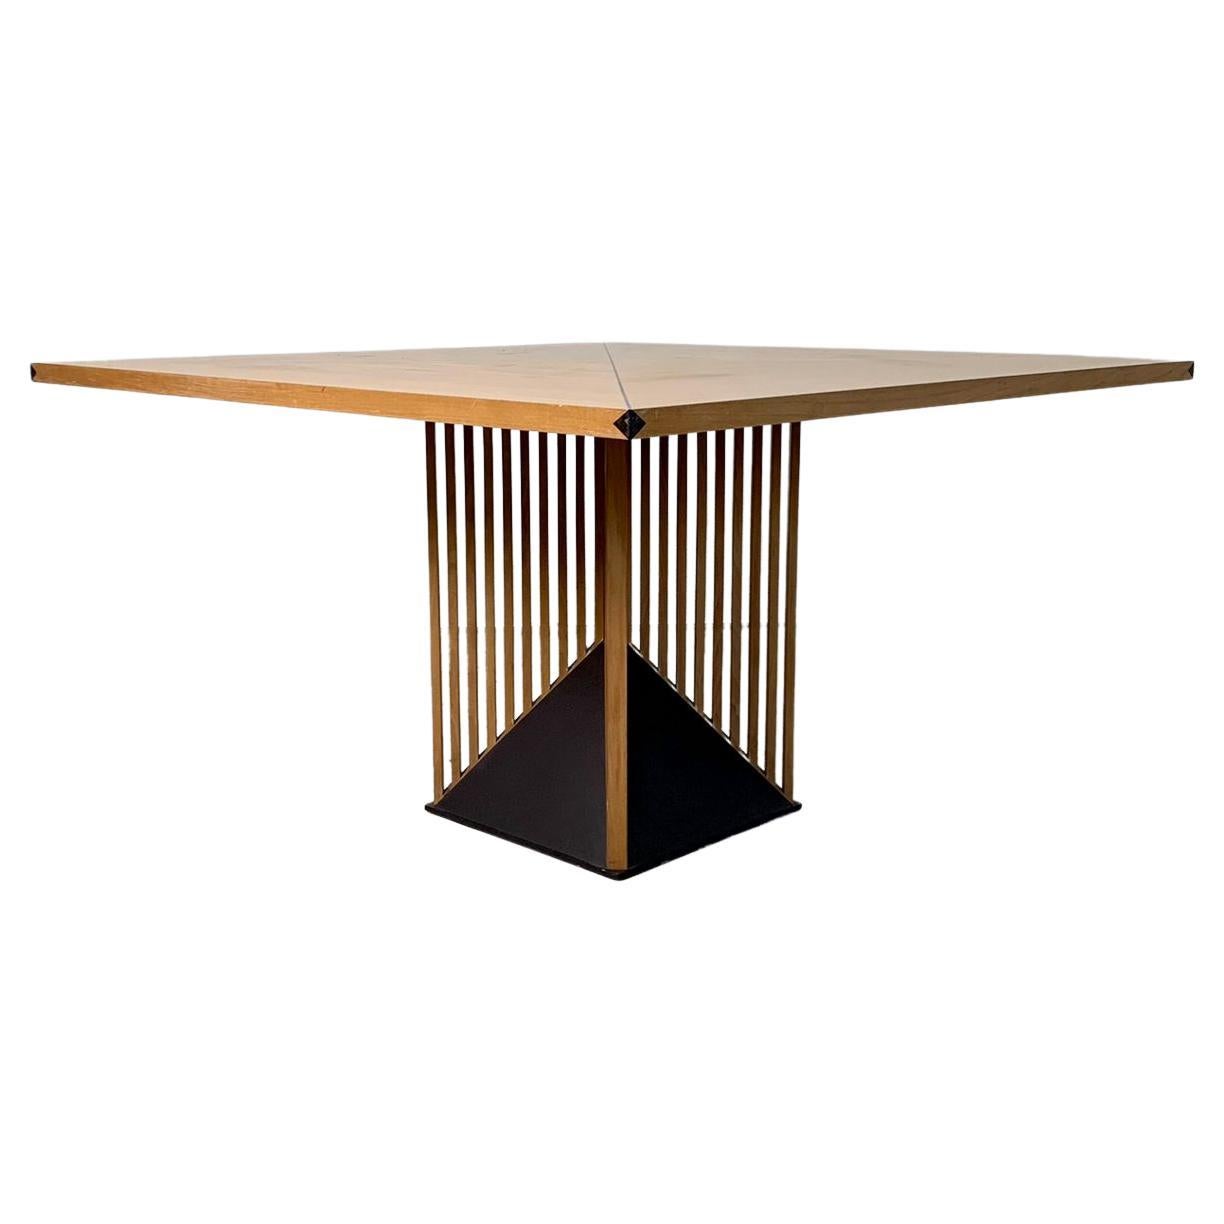 Acerbis Dining Room Tables